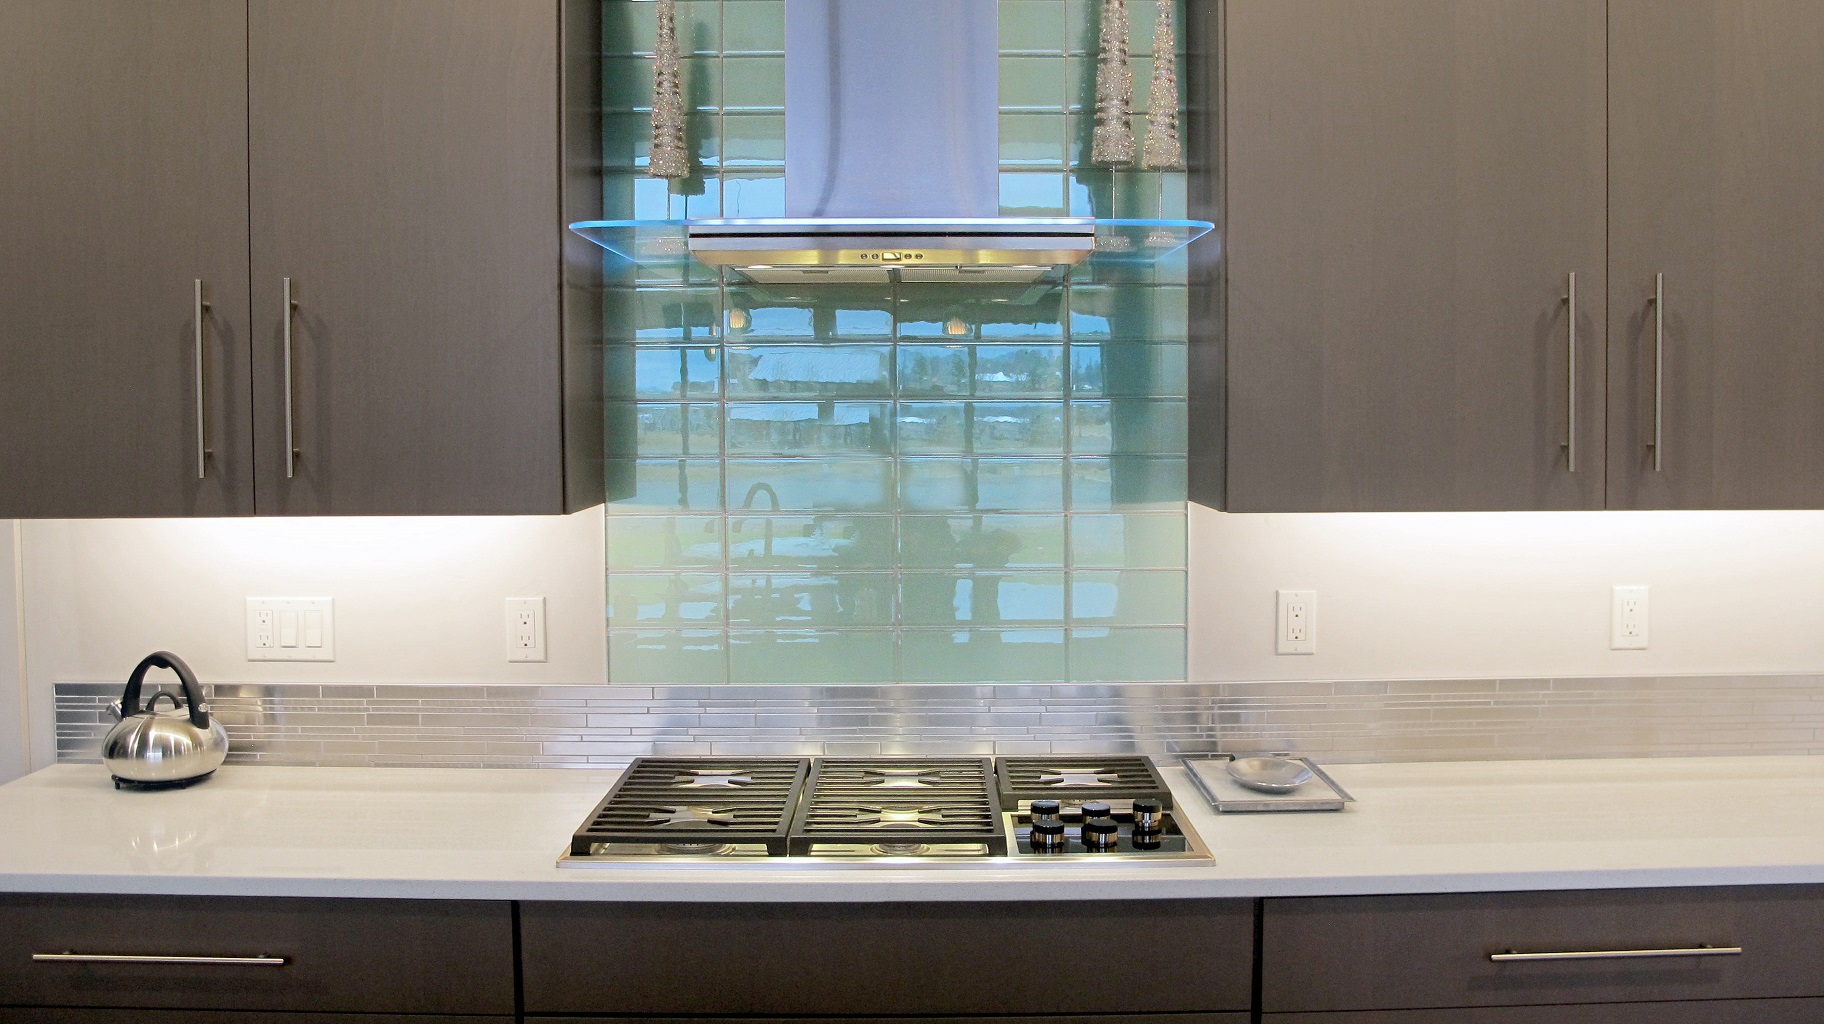 Aqua Blue Crystile 4x12 glass field tile Glazzio Soft Mint above a gas cook top arctic grey cabinets in the kitchen with Pental quartz perimeter. 